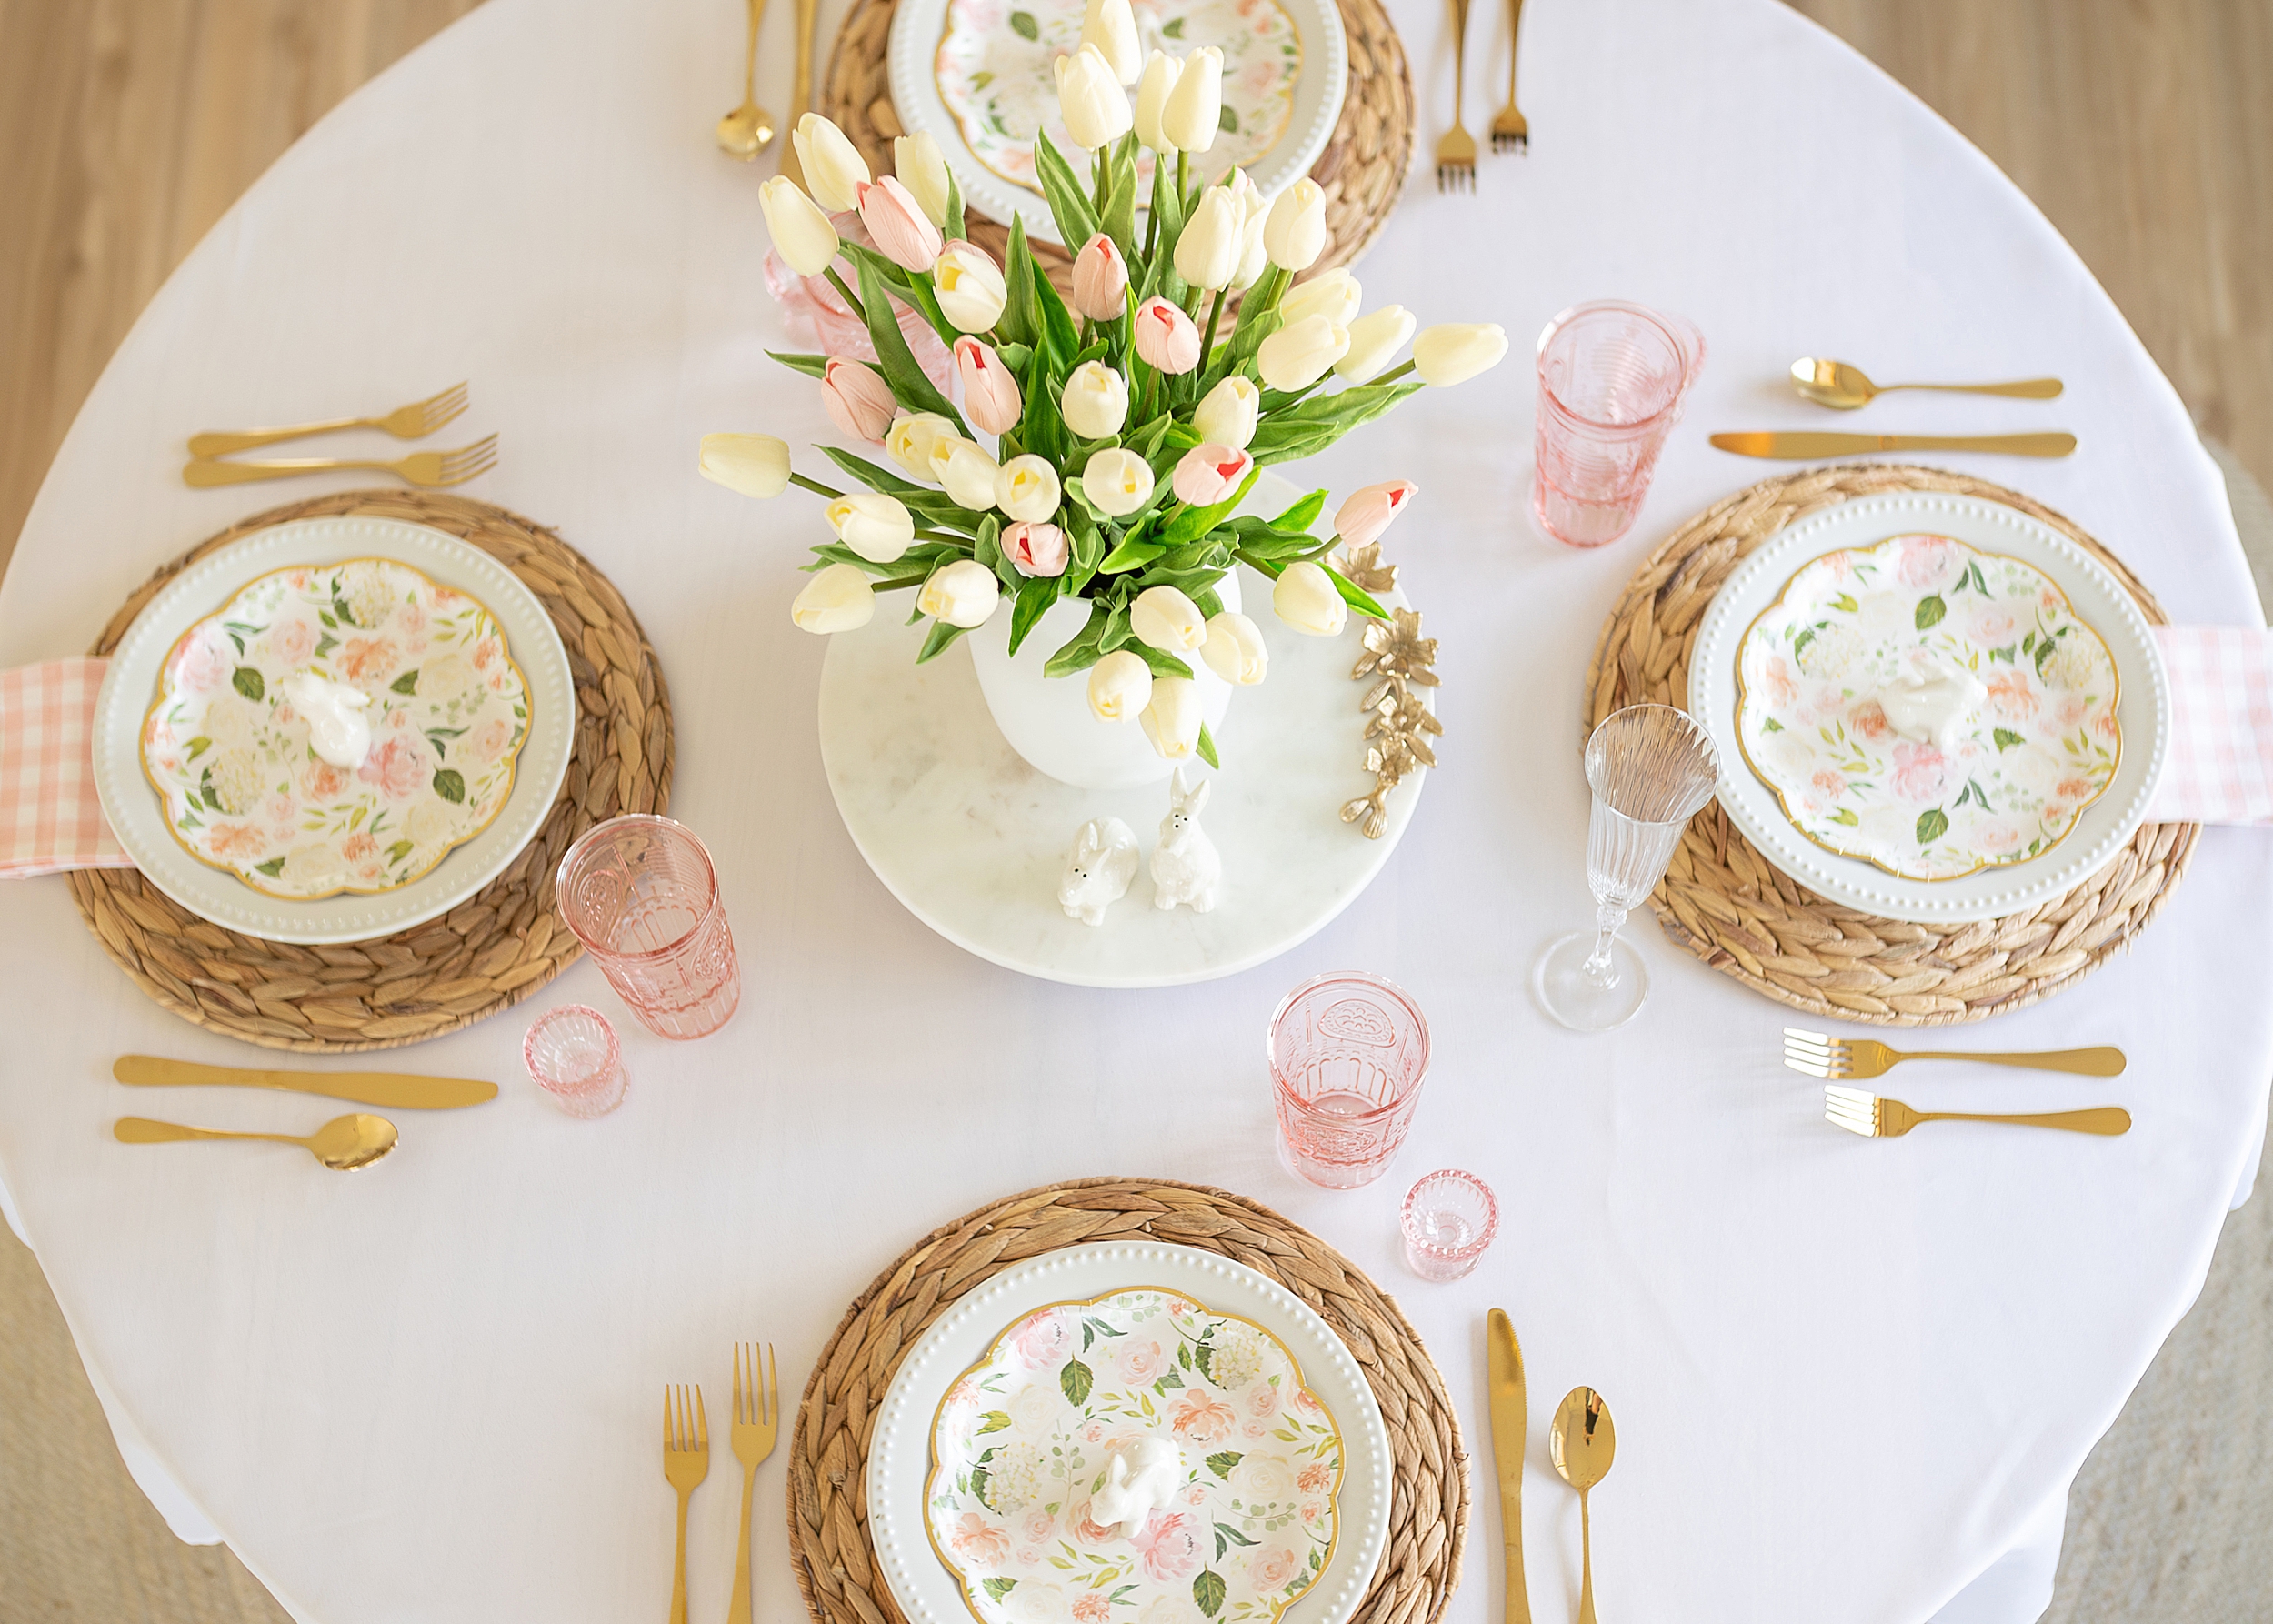 A pastel pink and white table set for Easter.